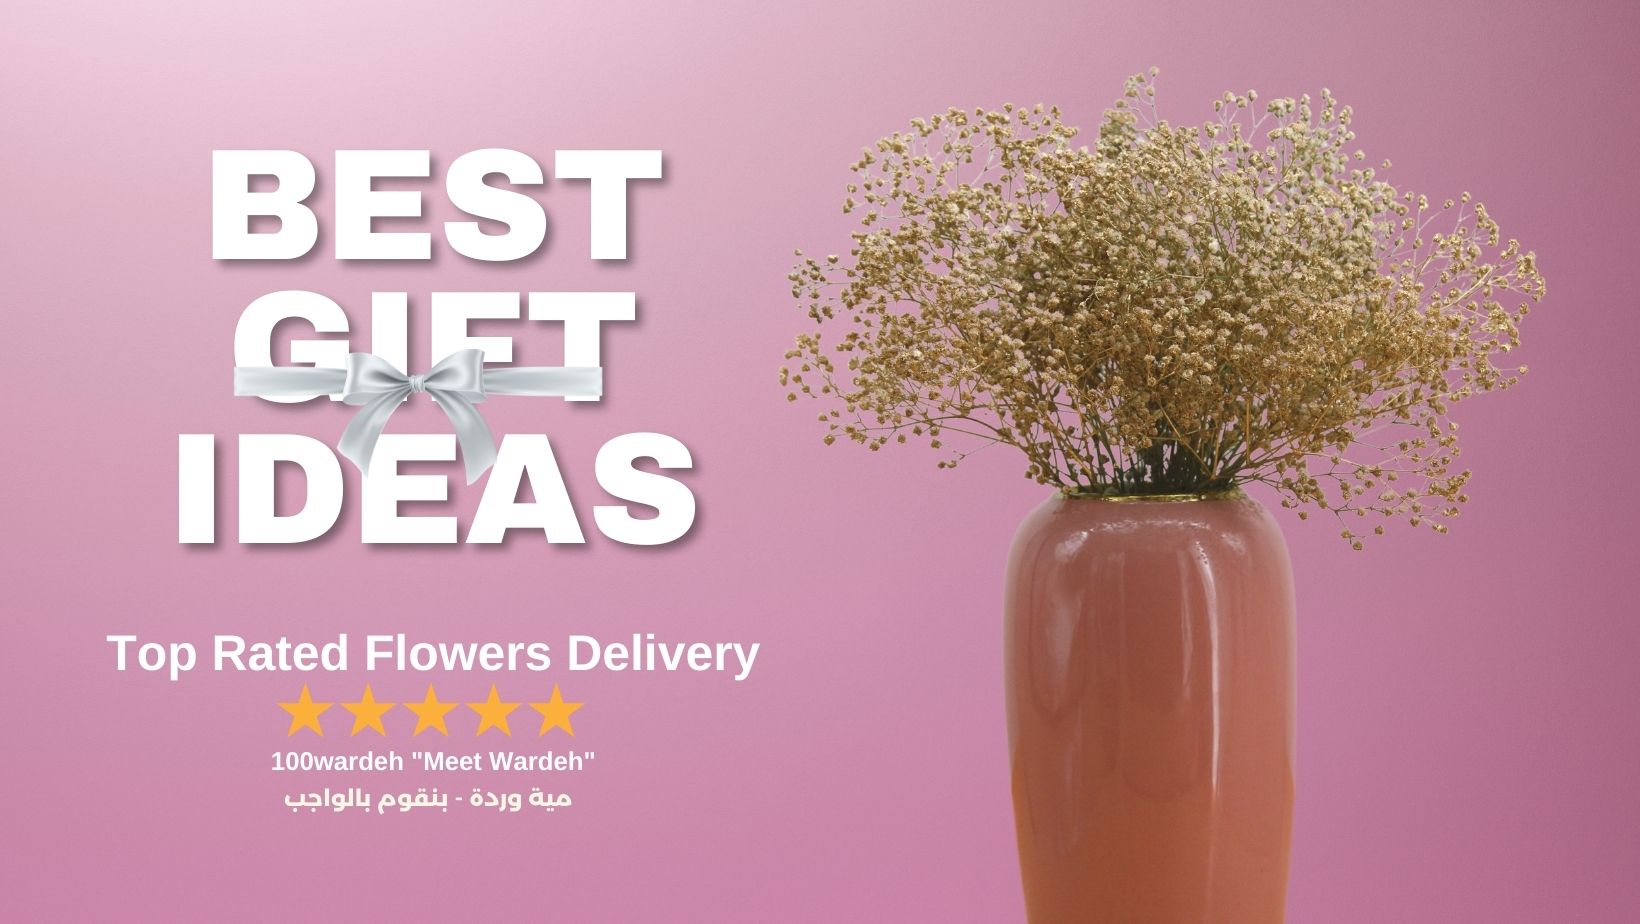 Send Flowers and gifts delivery Amman Jordan